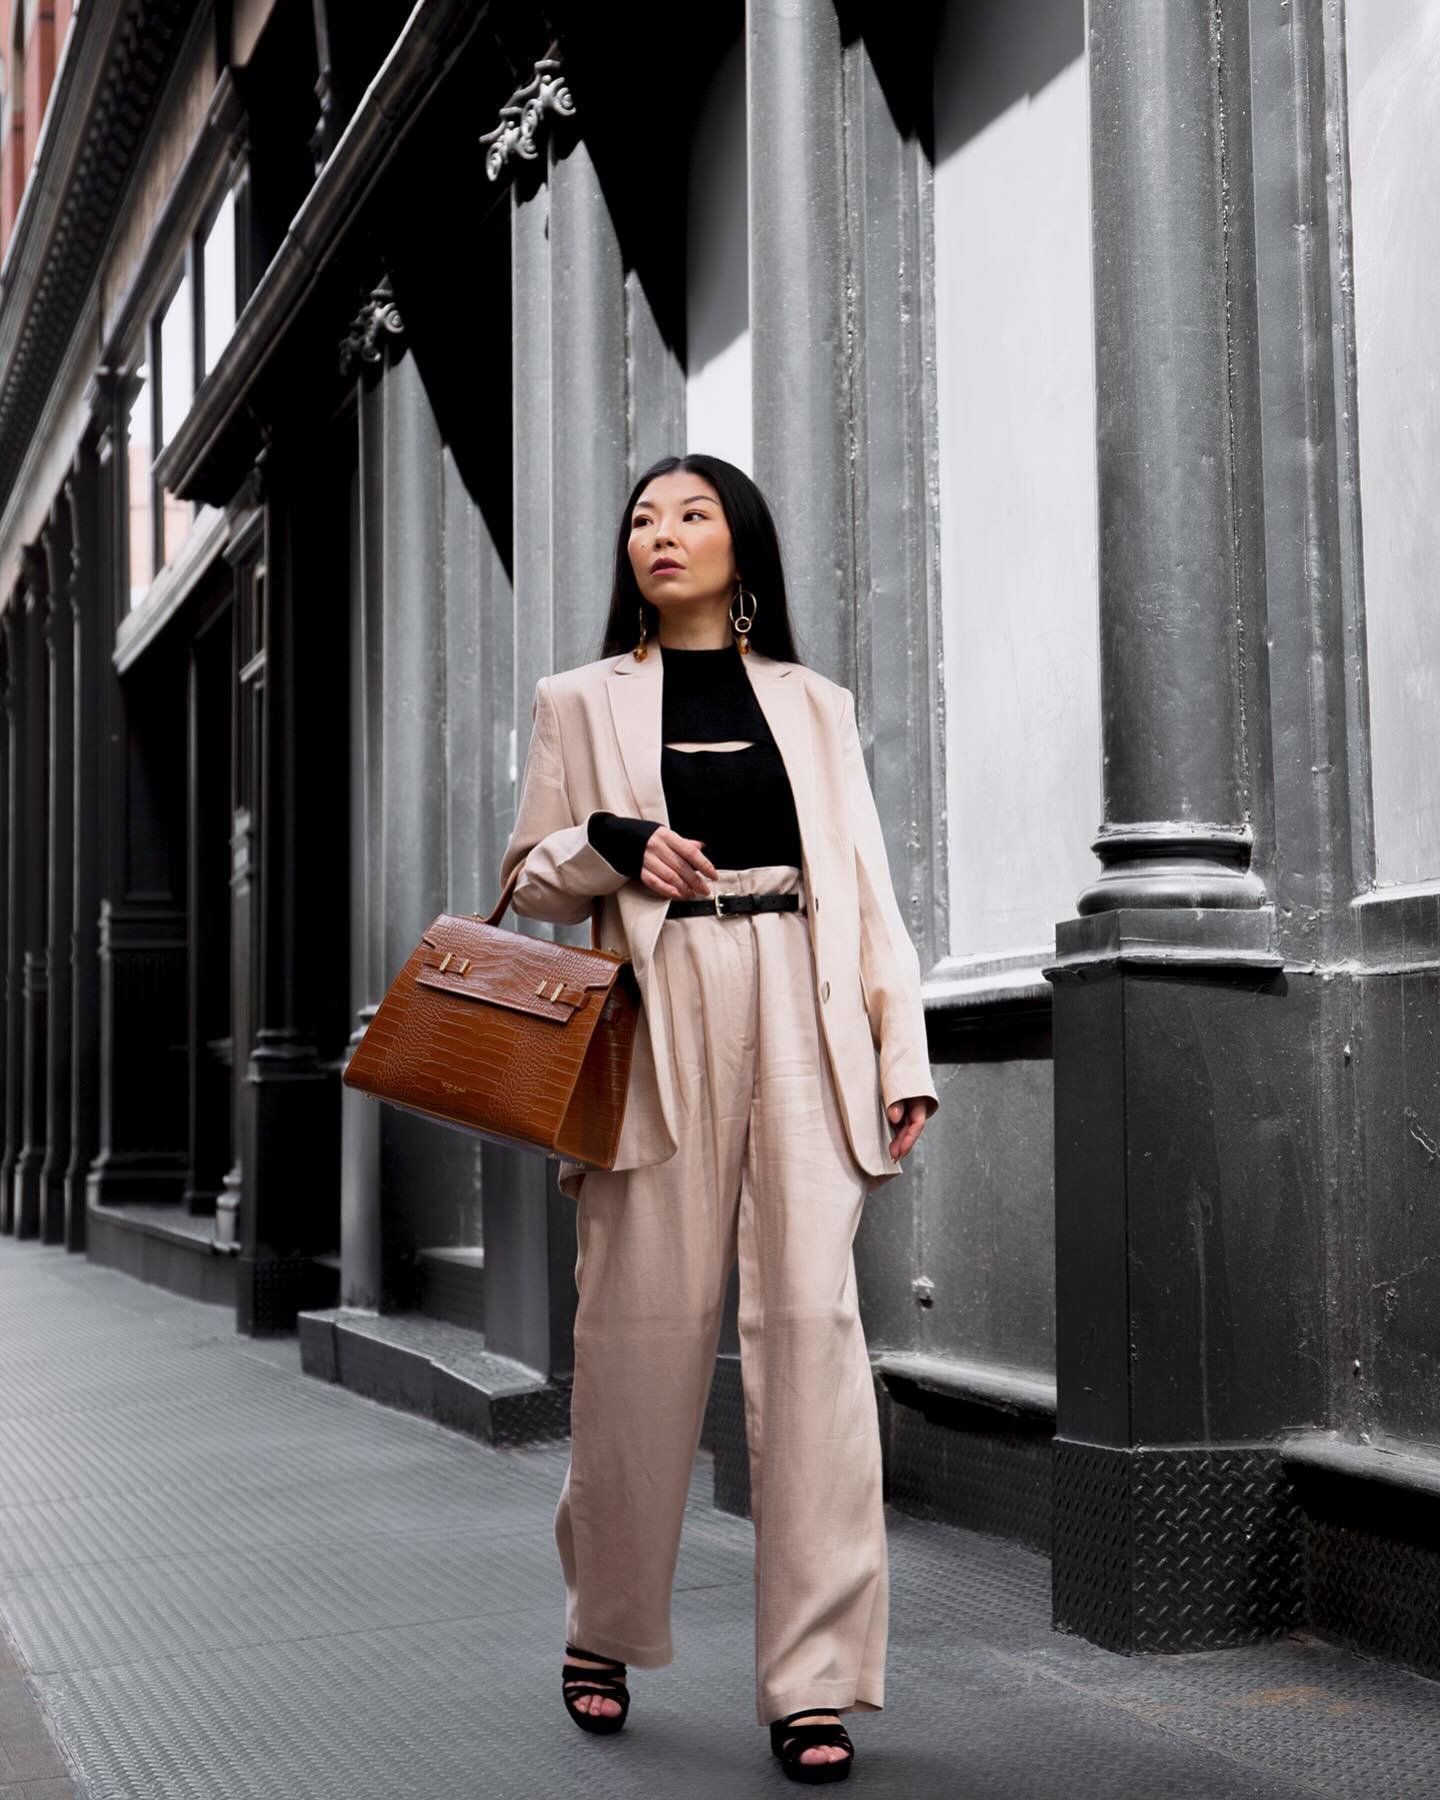 pain au chocolat 🥐🍪🍫
Linen Suit: @nationltd
Bag 💼: @teddy_blake
Shoes: @inez 15% off with code Suzanne15

Shop the look on my @shop.Itk page and here: 
https://liketk.it/4D0cT

#suitstyle #streetstyle #backtowork #linensuit #springfashion